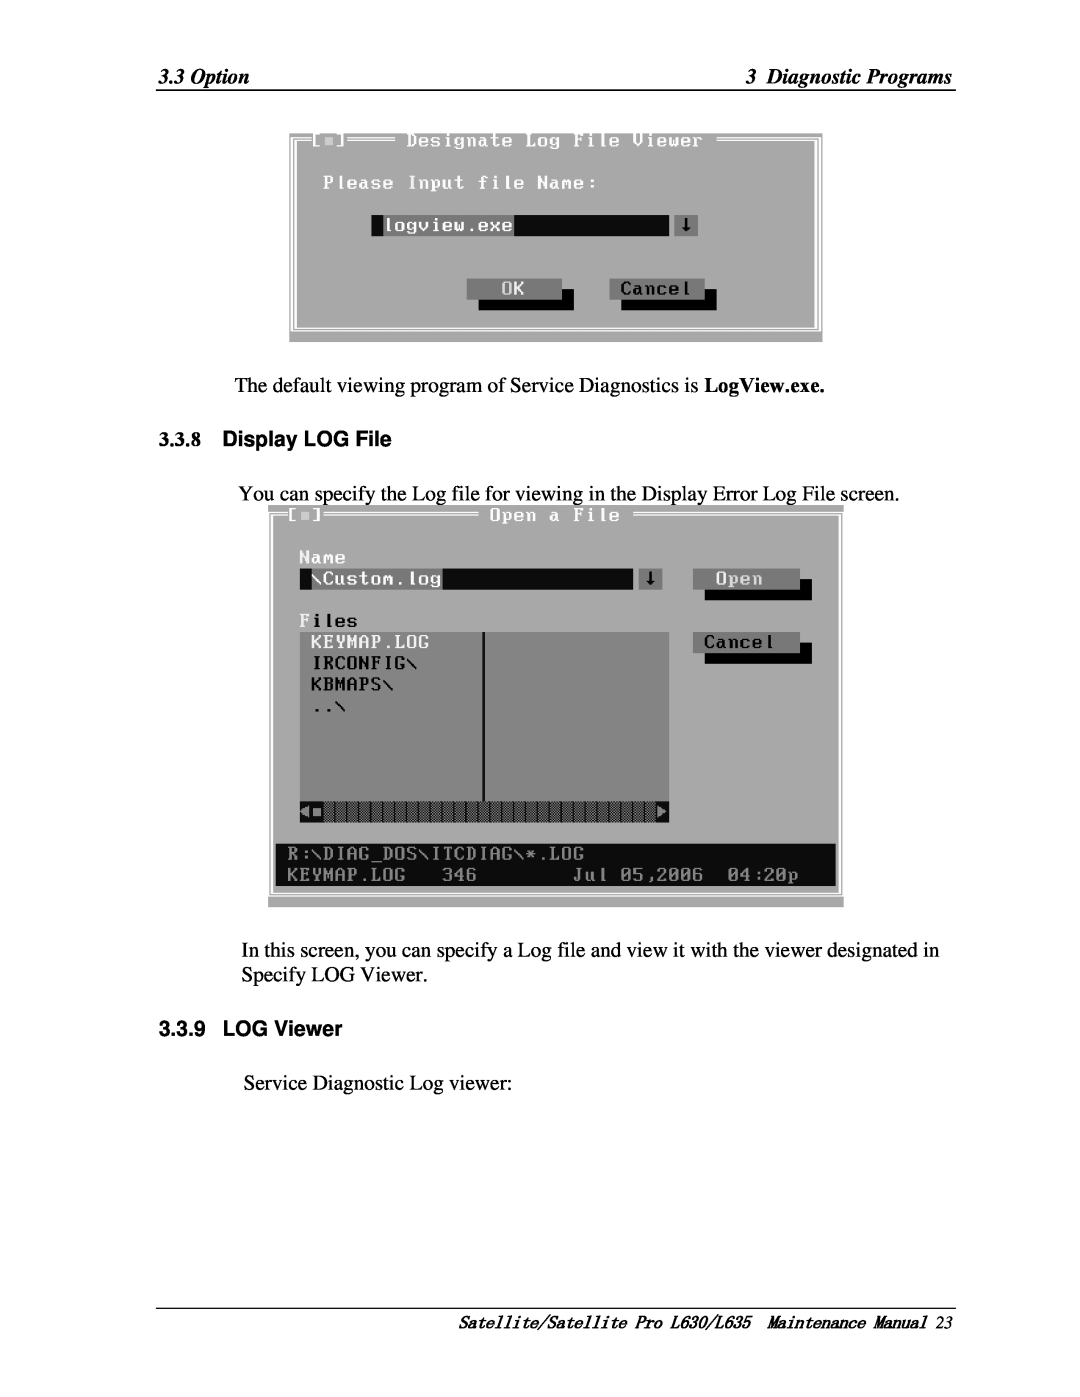 Toshiba L630, L635 manual The default viewing program of Service Diagnostics is LogView.exe, Display LOG File, LOG Viewer 